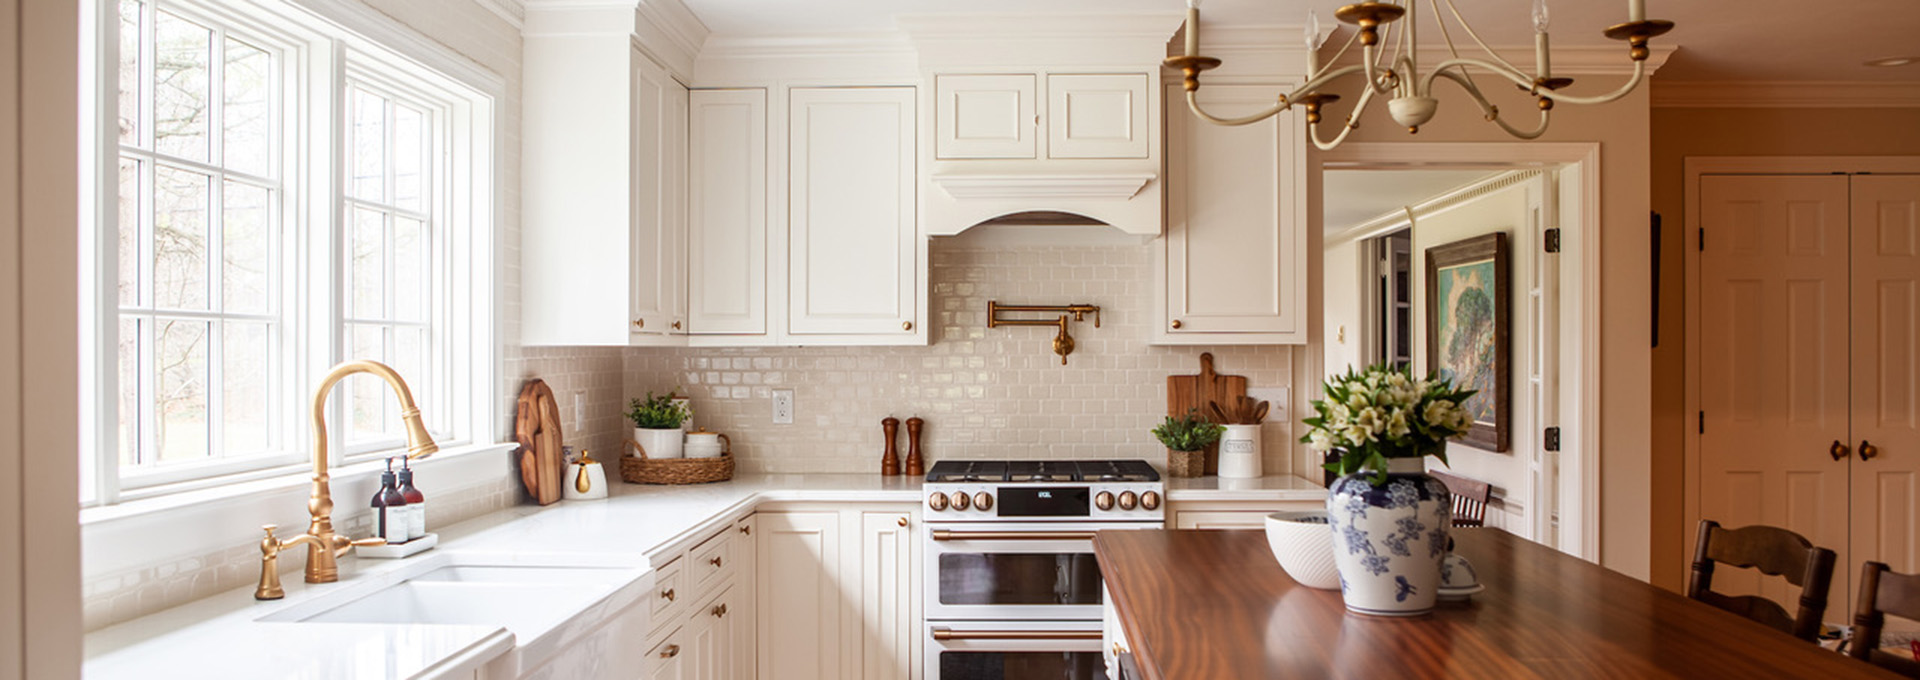 Syracuse Kitchen Cabinets And